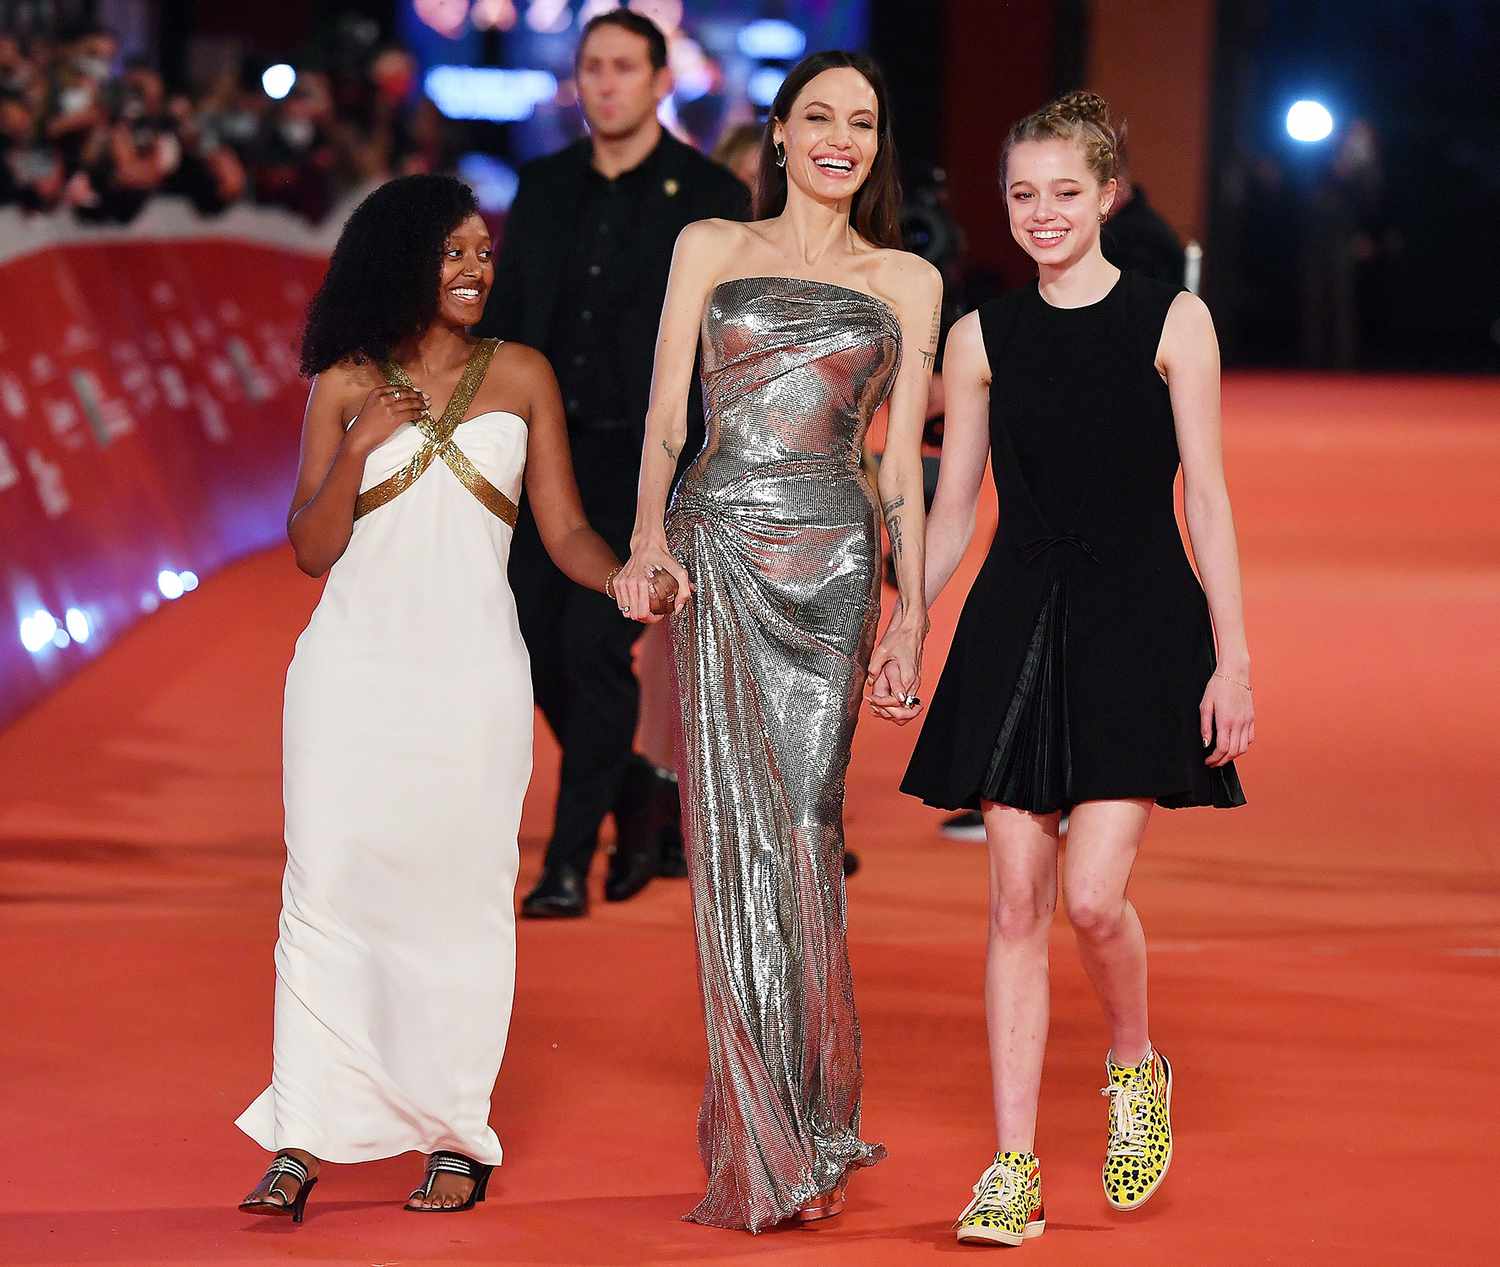 Zahara Marley Jolie-Pitt, Angelina Jolie and Shiloh Jolie-Pitt attend the red carpet of the movie "Eternals" during the 16th Rome Film Fest 2021 on October 24, 2021 in Rome, Italy.